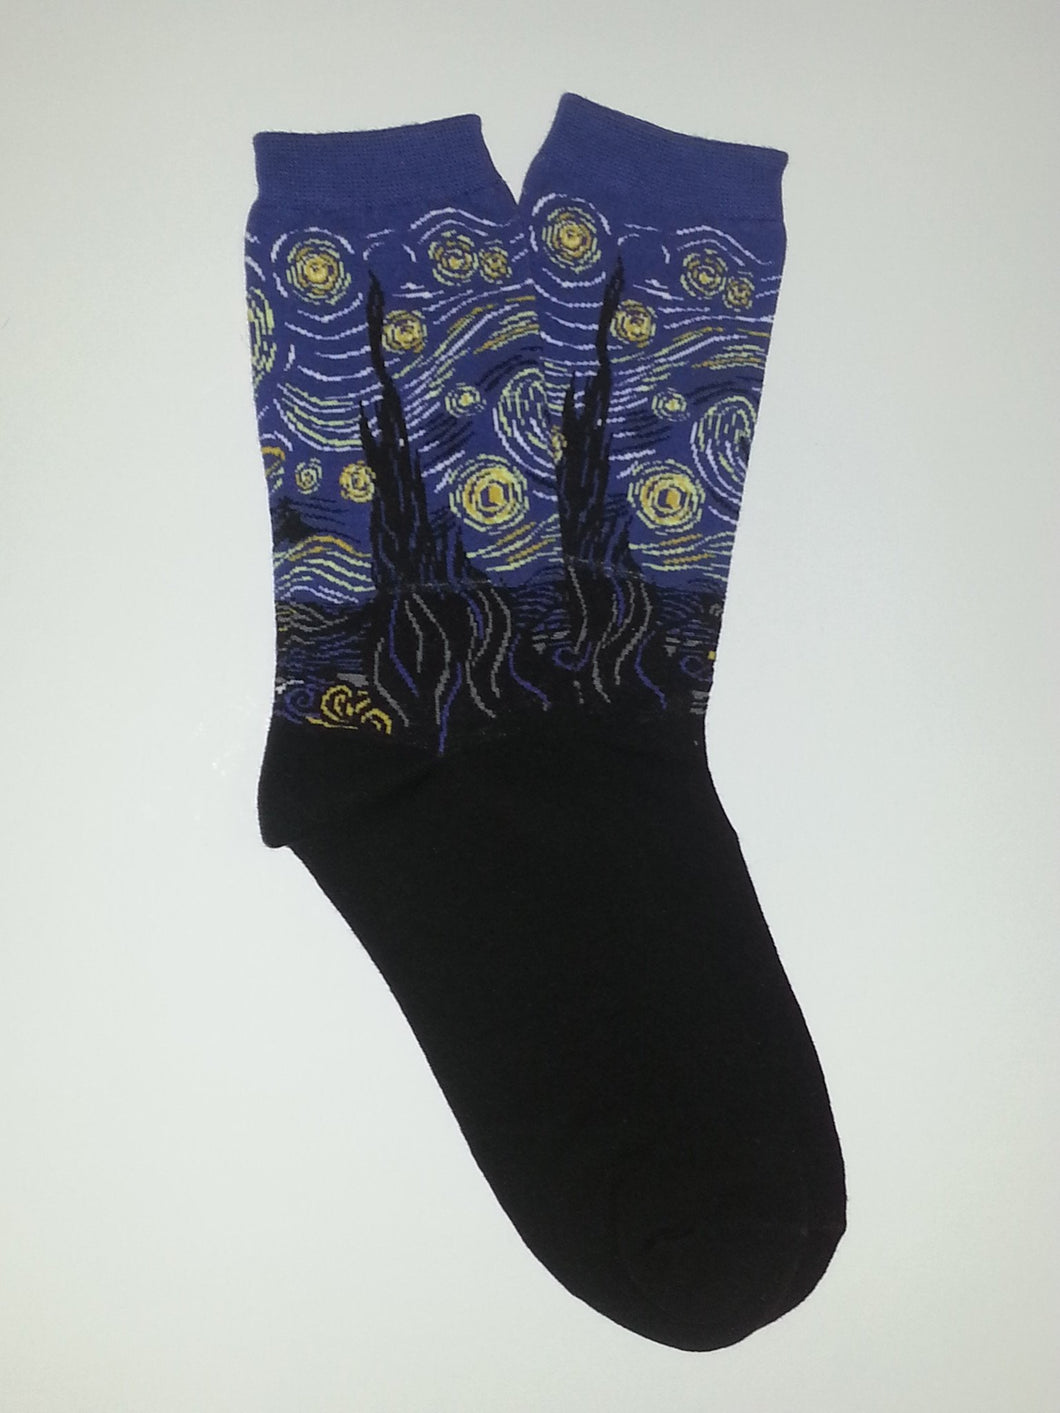 The Starry Night by Vincent van Gogh Crew Socks